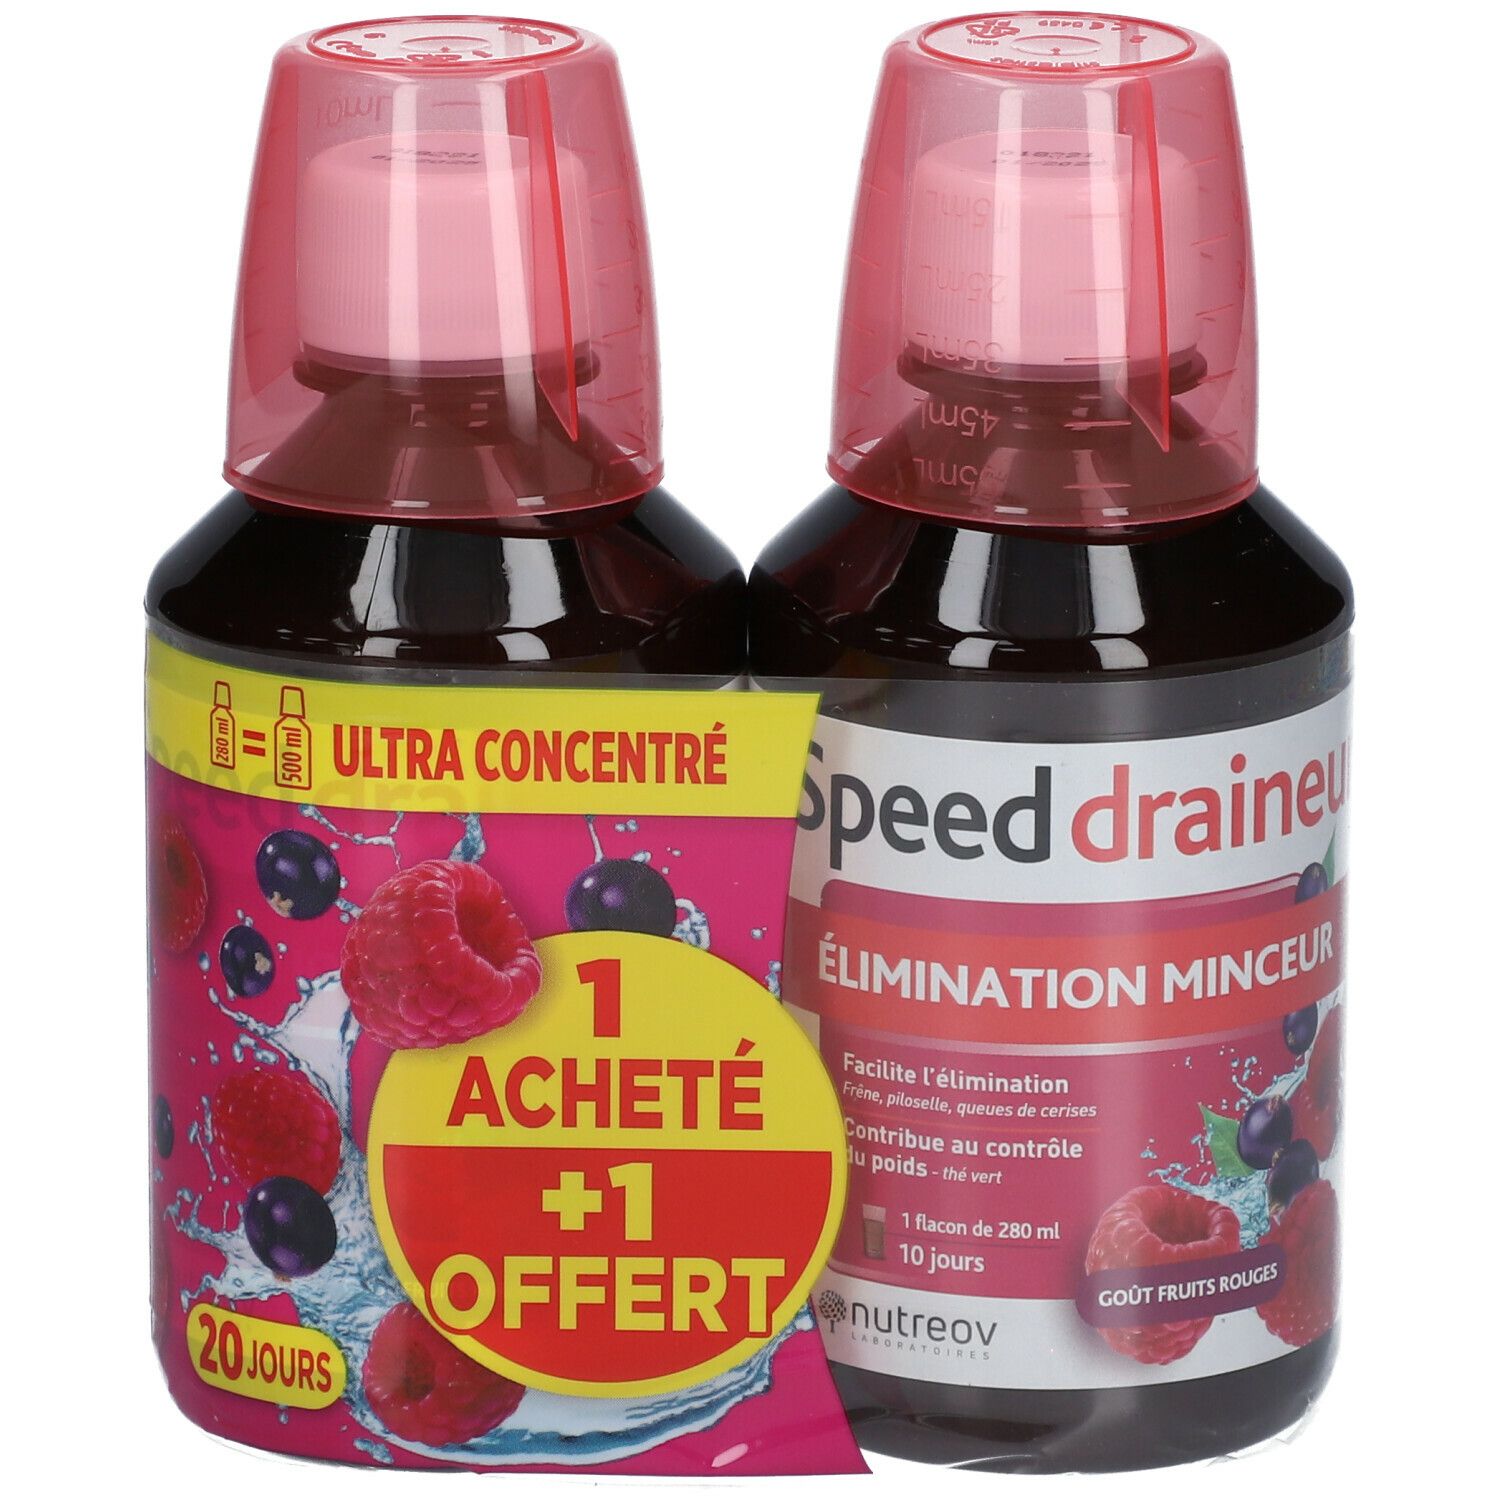 Nutreov Physcience Speed draineur® Fruits rouges